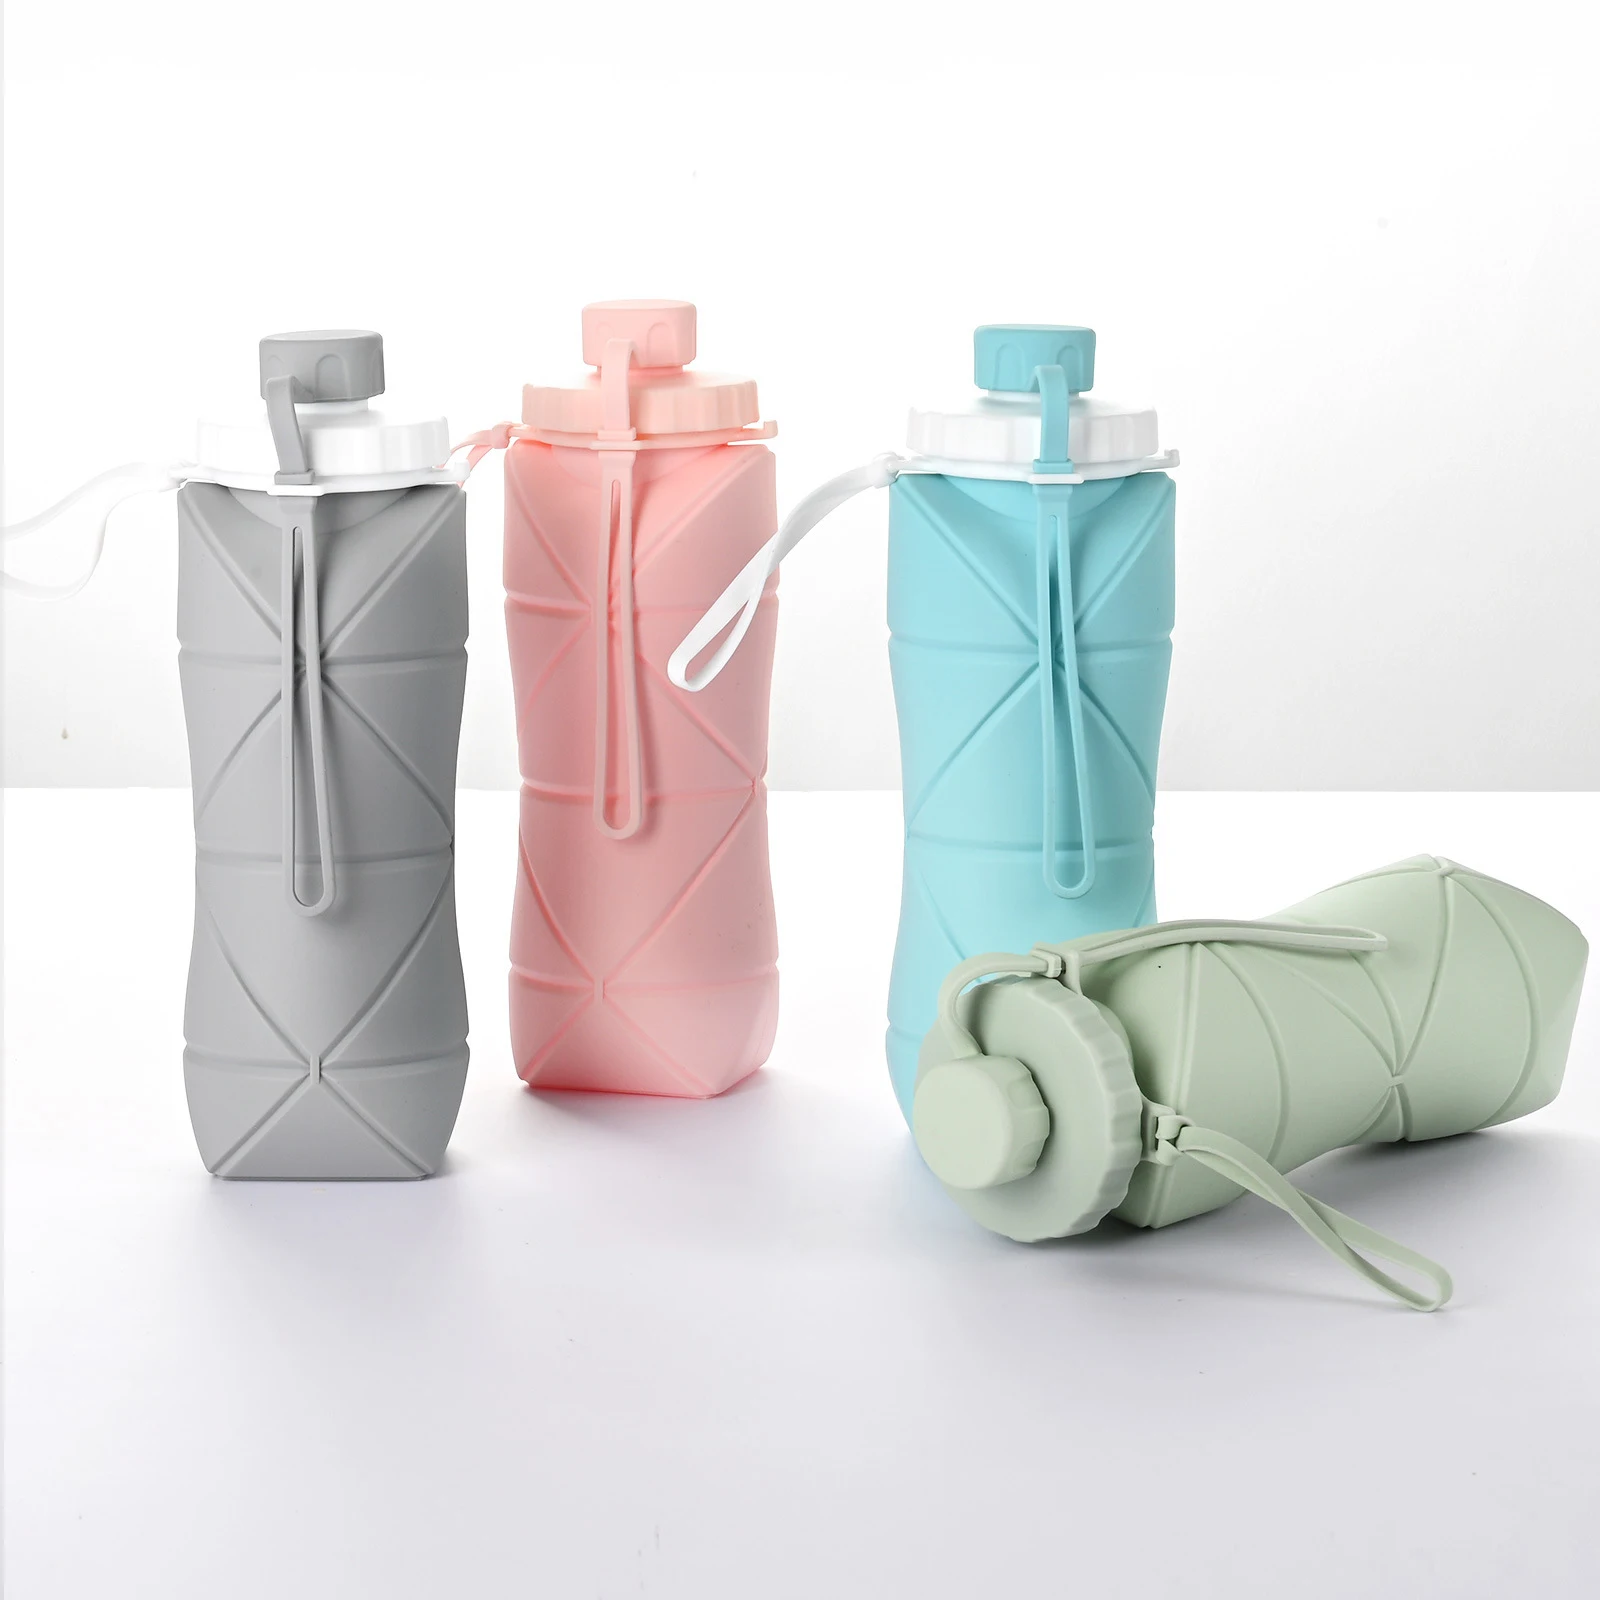 Collapsible Silicone Water Bottle Leakproof Valve BPA Free Foldable Water  Bottle Gym Camping Sports Lightweight Travel Durable - AliExpress